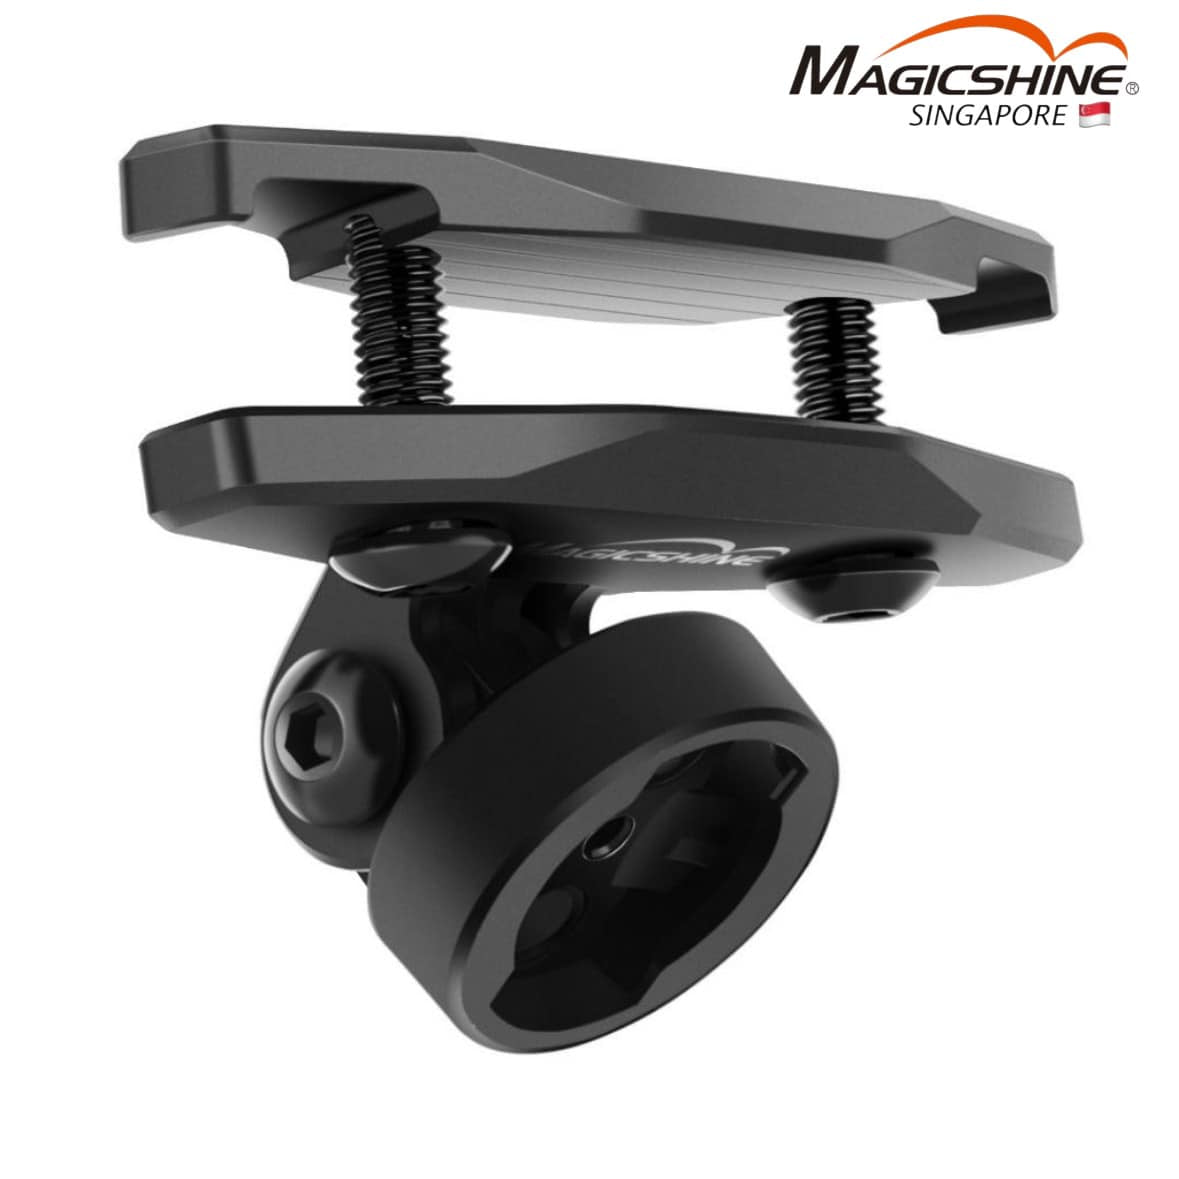 Magicshine GoPro Saddle Mount with SEEMEE Series Tail Light Adapter S$6.90